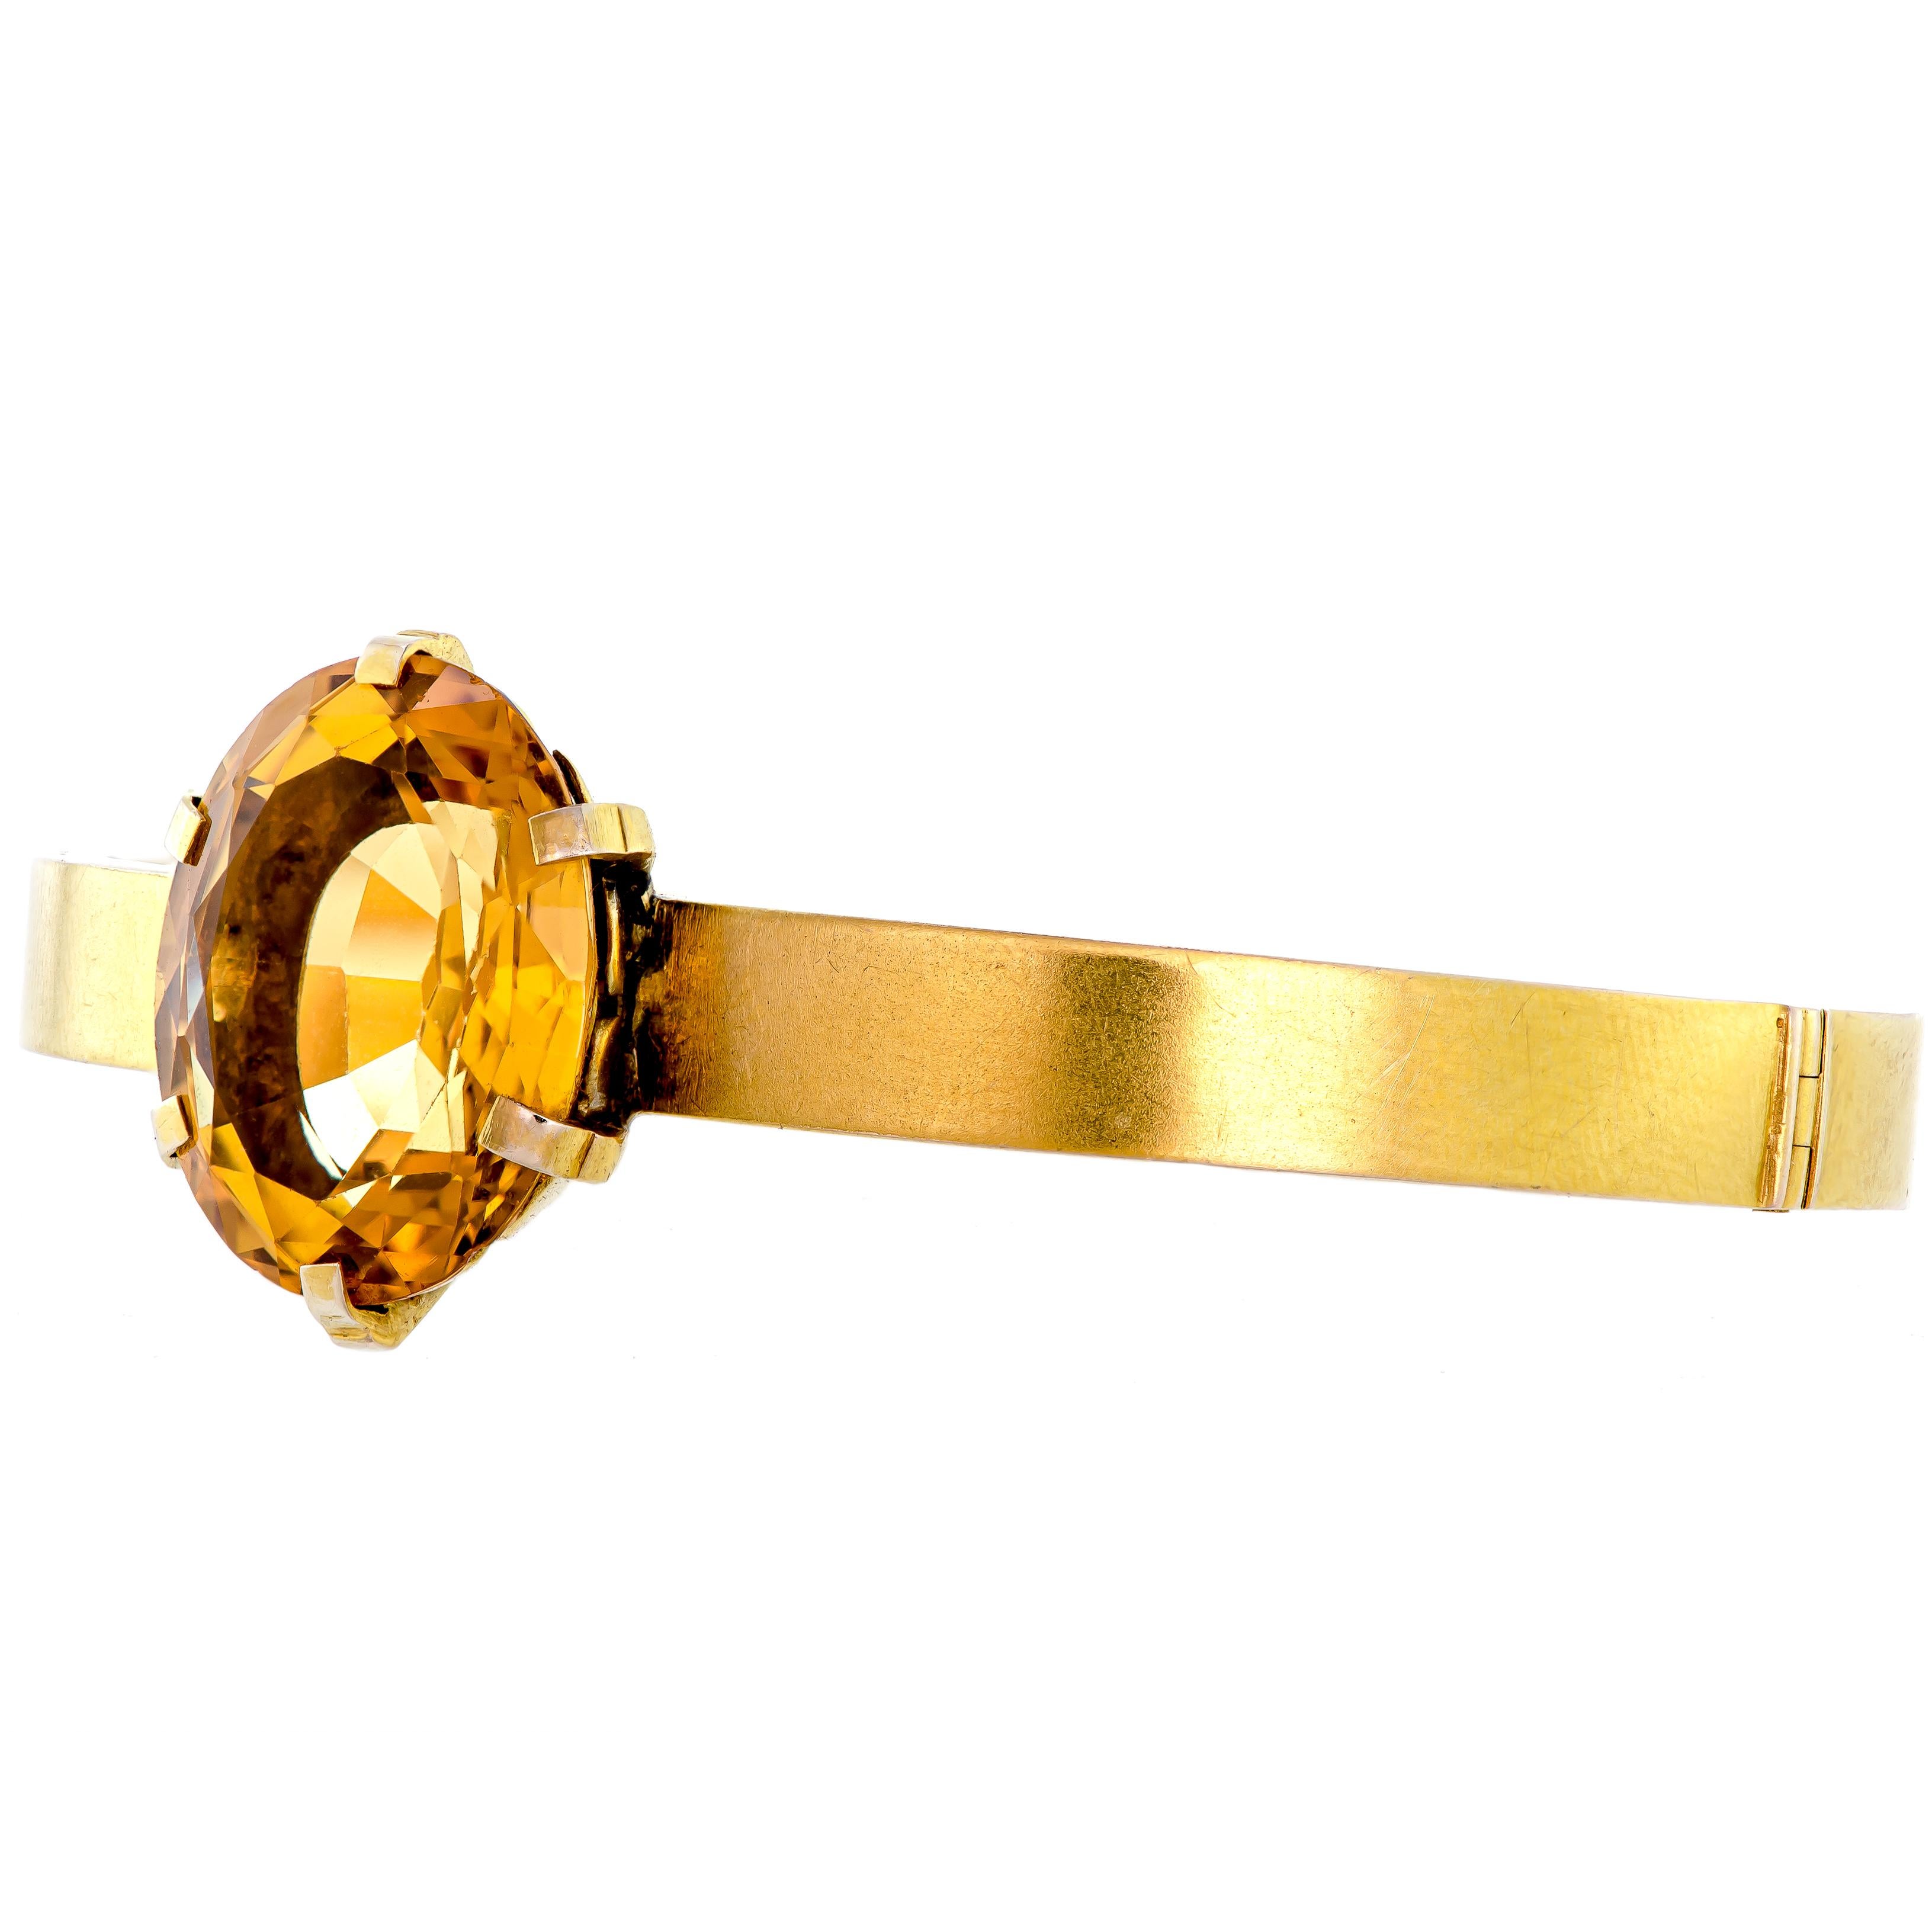 This stunning antique citrine and 14 karat yellow gold bangle bracelet is a rare gem. The beautiful bracelet dates back to the 1890s, features one large oval cut citrine that radiates a lovely warm orange glow and pairs perfectly with the smooth